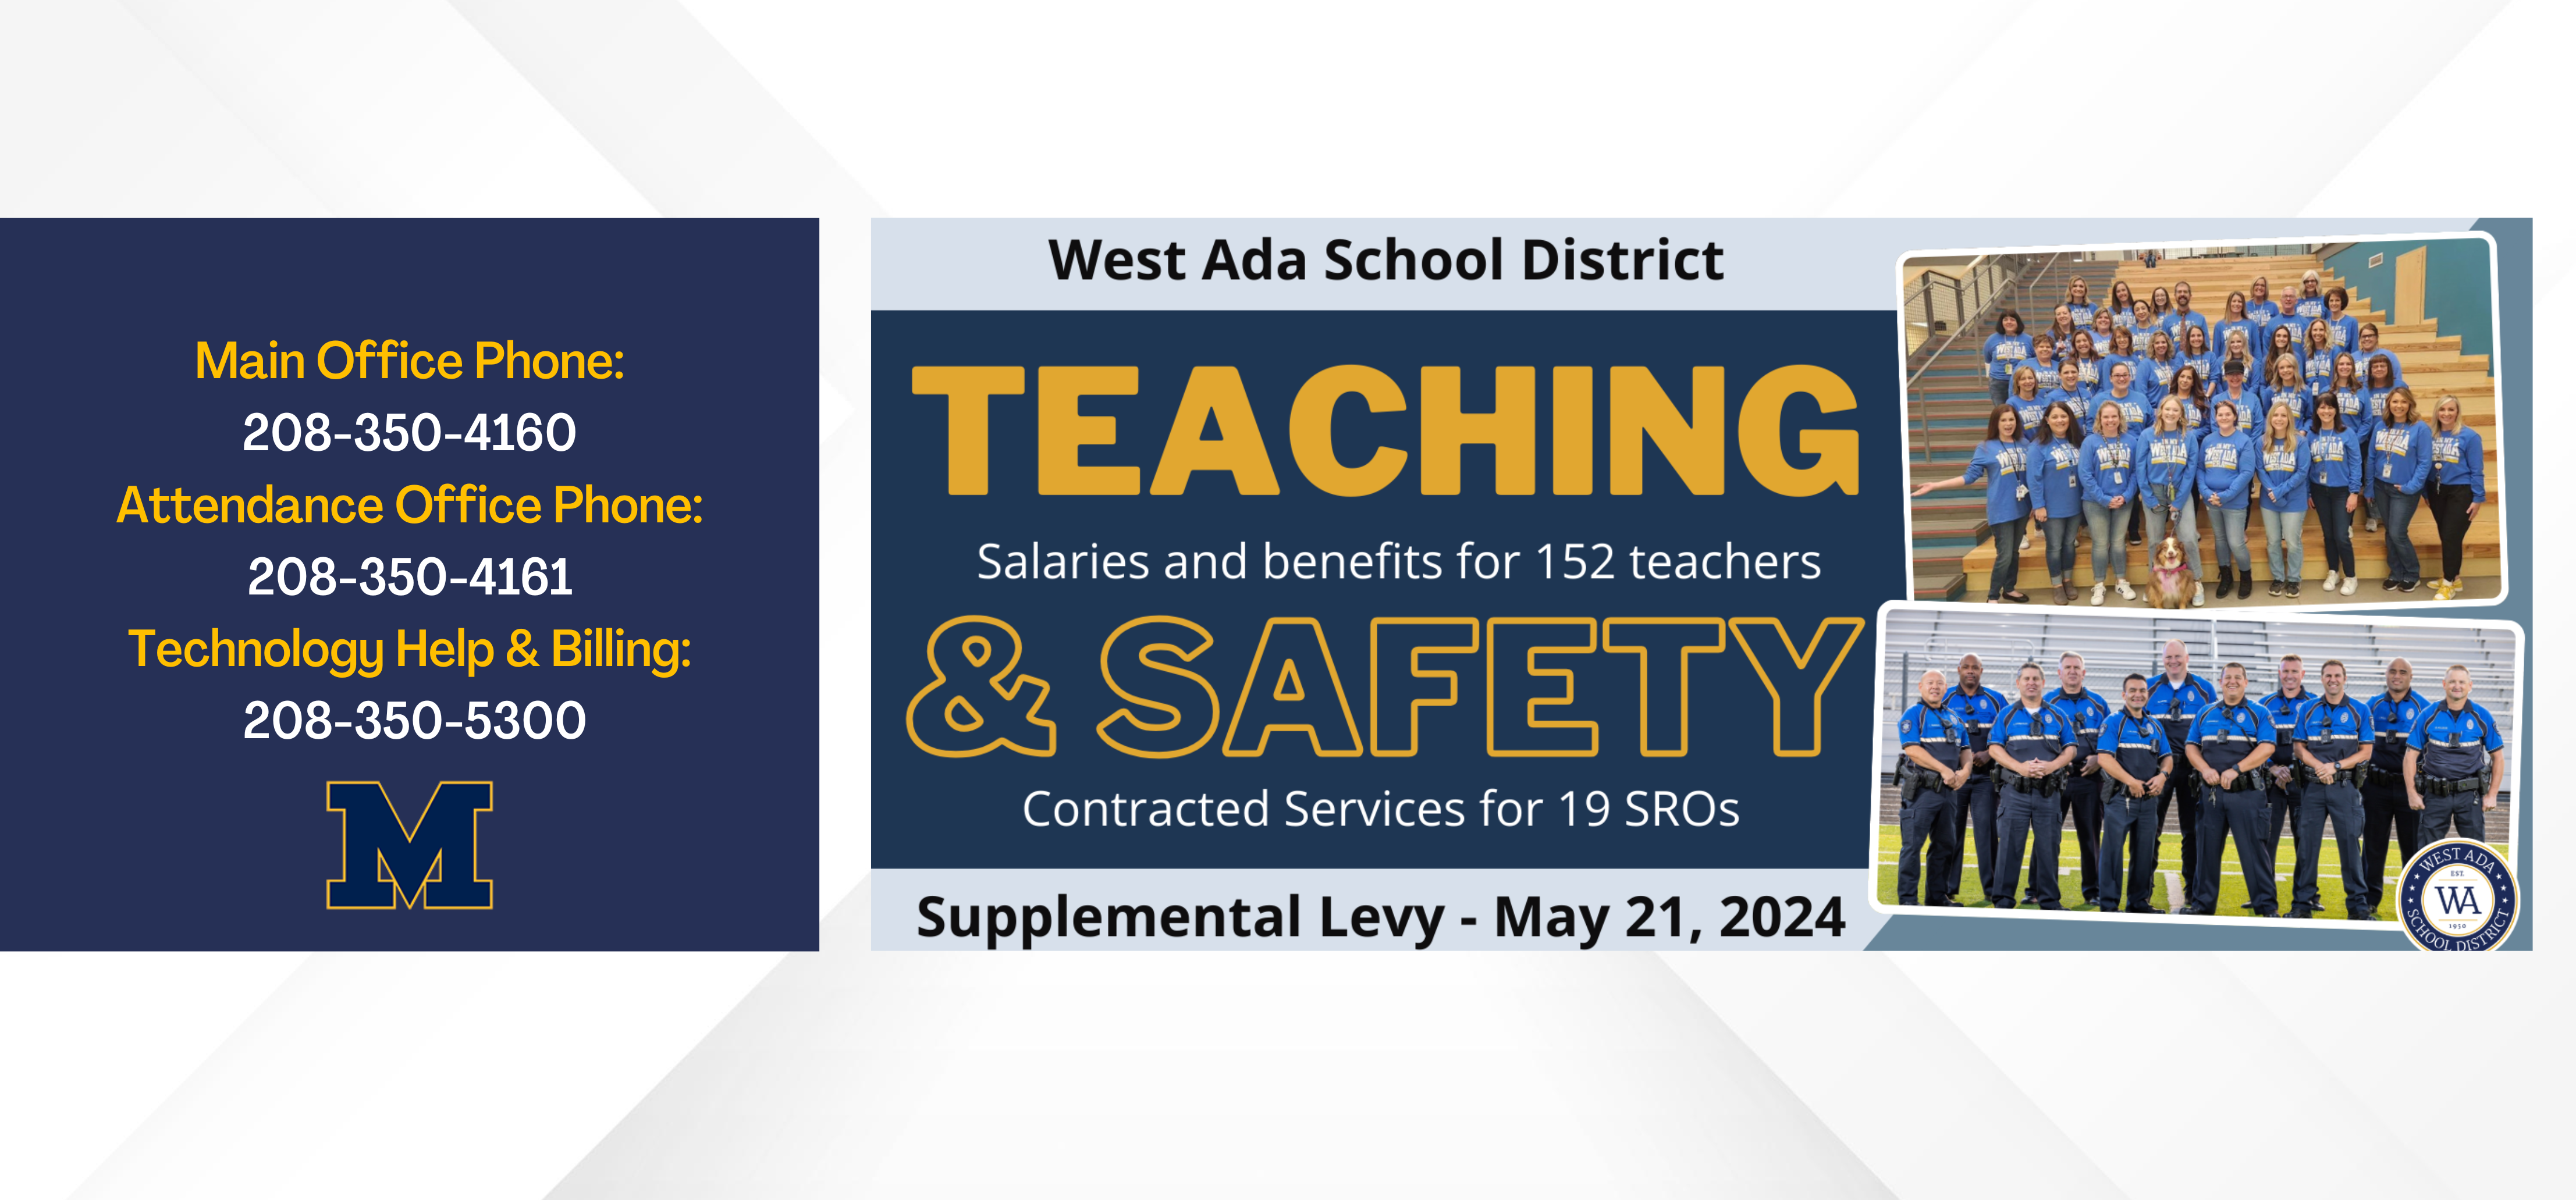 West Ada Teaching & Safety Supplemental Levy - May 21